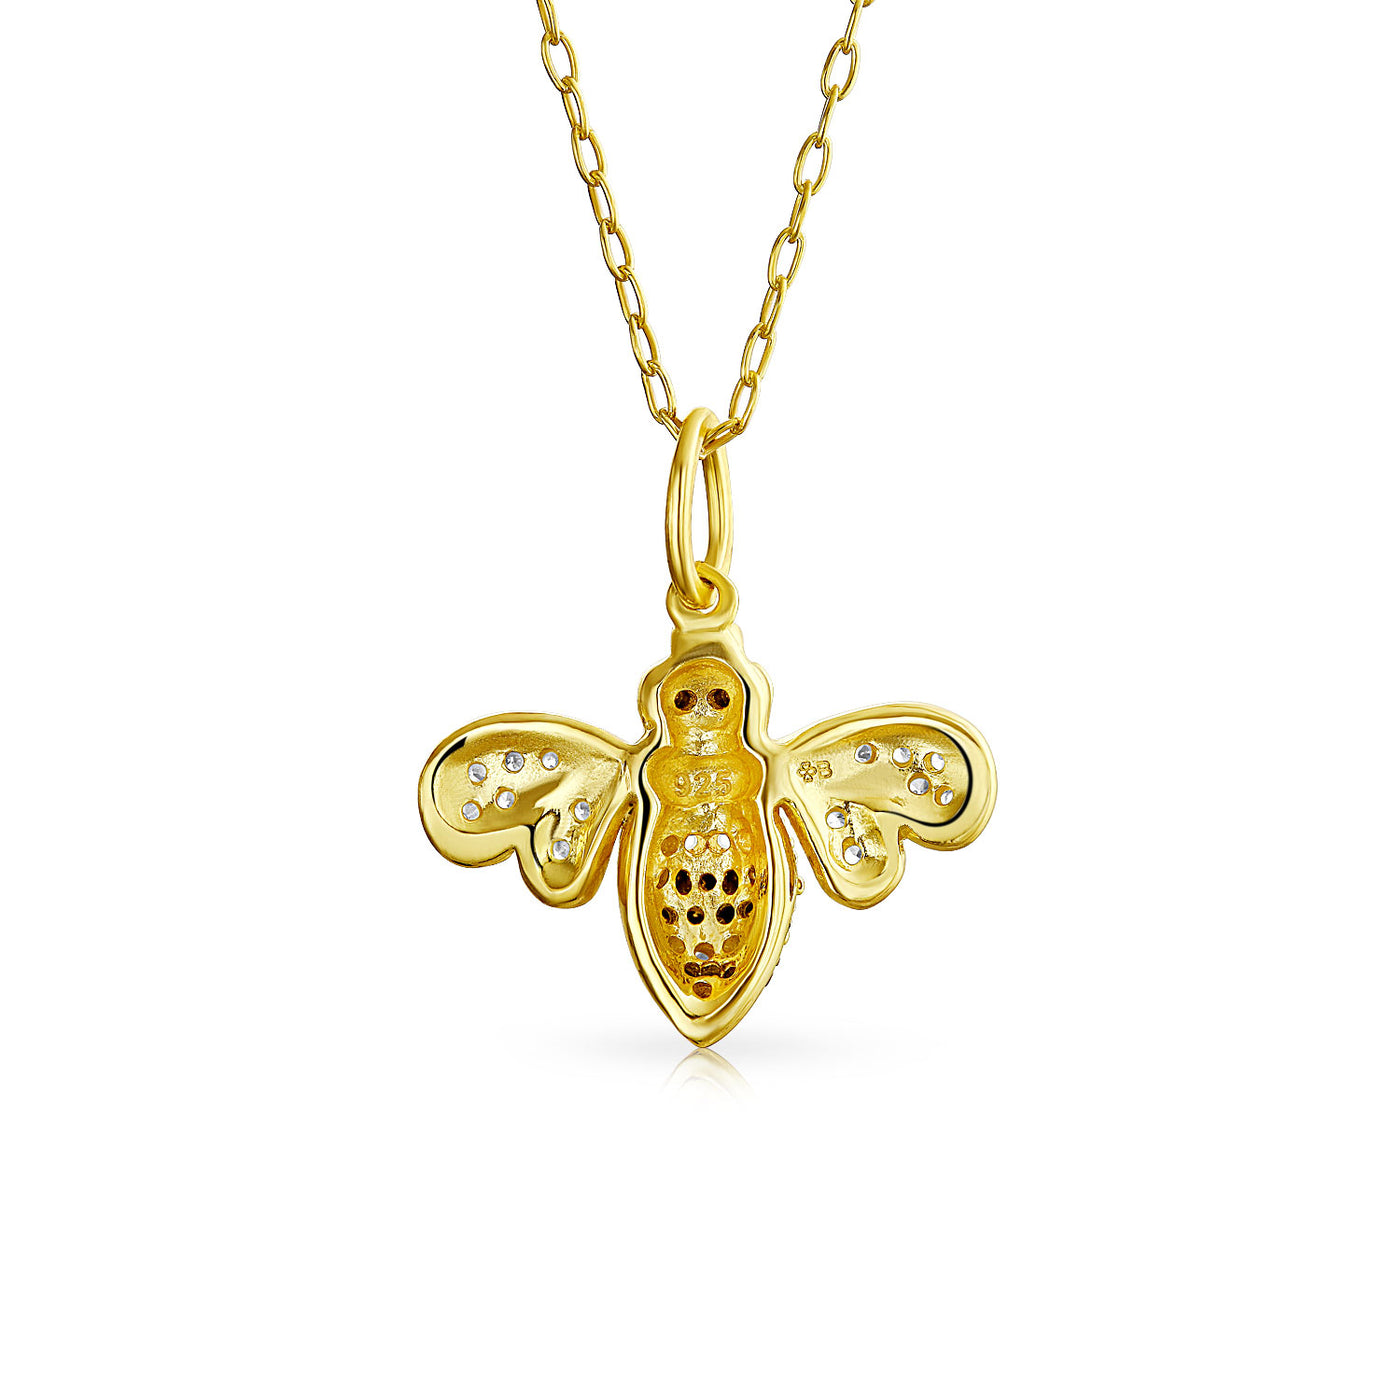 Bumble Bee Queen Bee Golden Black Pendant Necklace Gold Plated